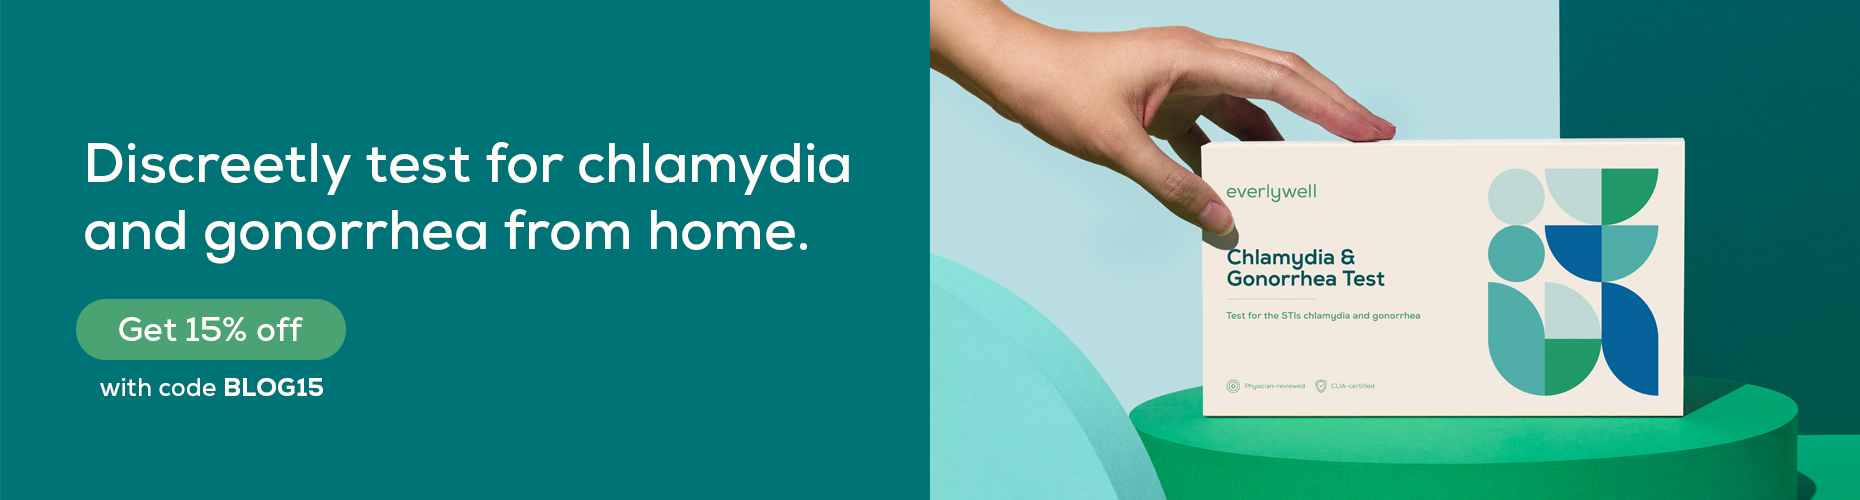 Everlywell Chlamydia and Gonorrhea promo banner